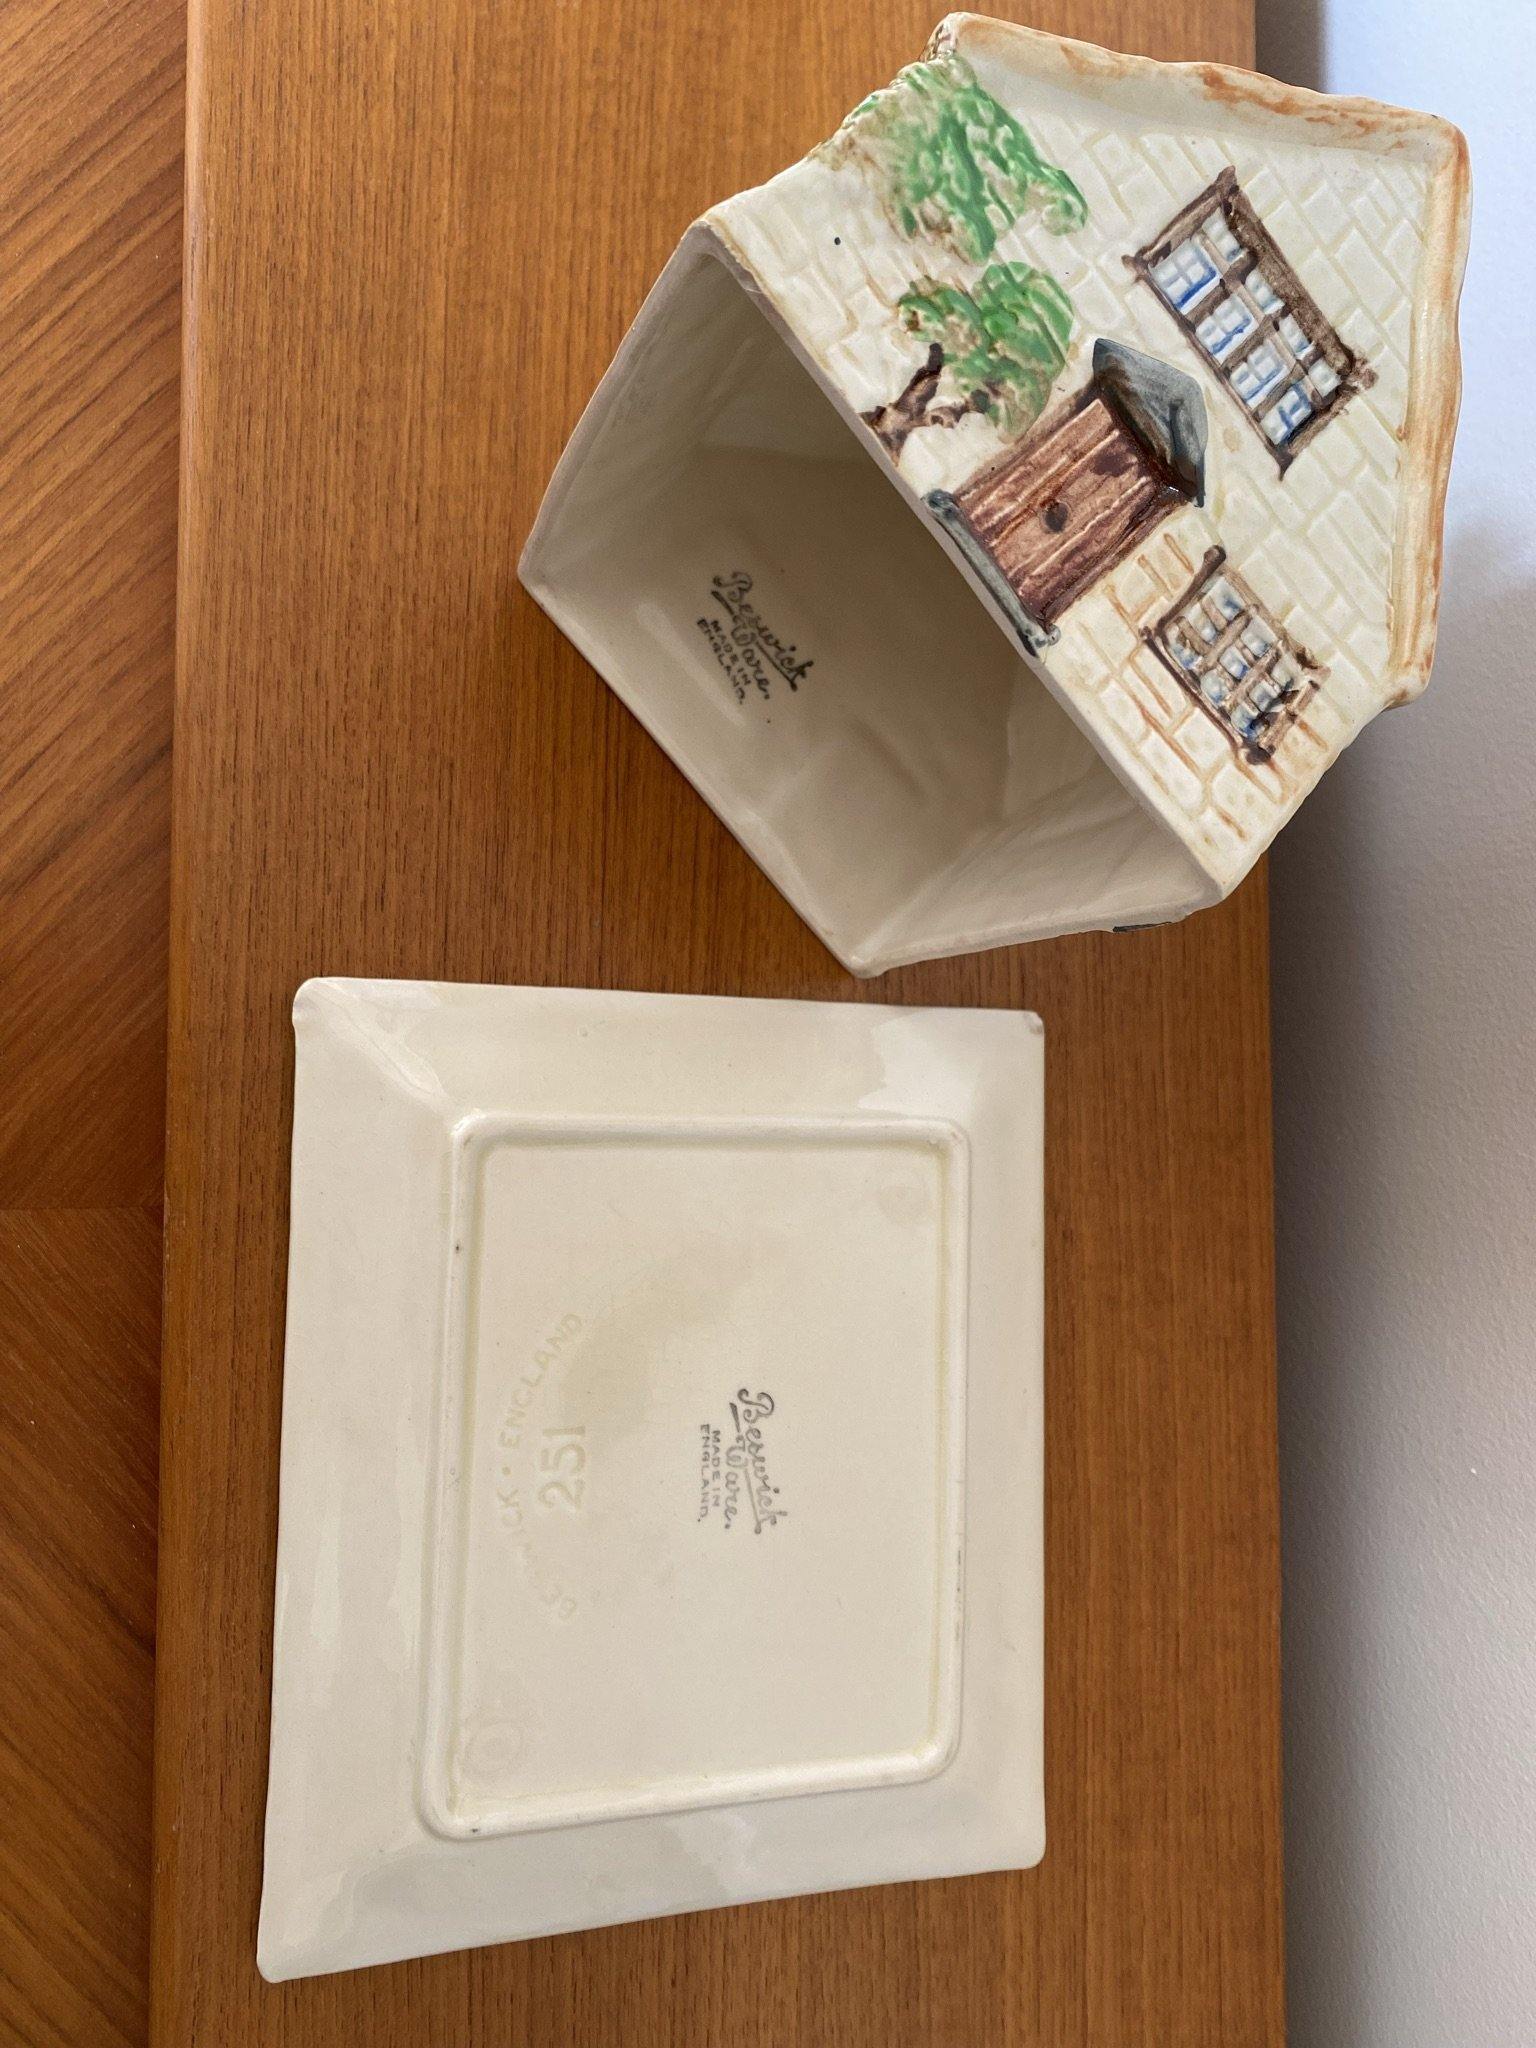 Underside of dish and interior of Cottage ware cheese dish with Beswick logos- Cook Street Vintage